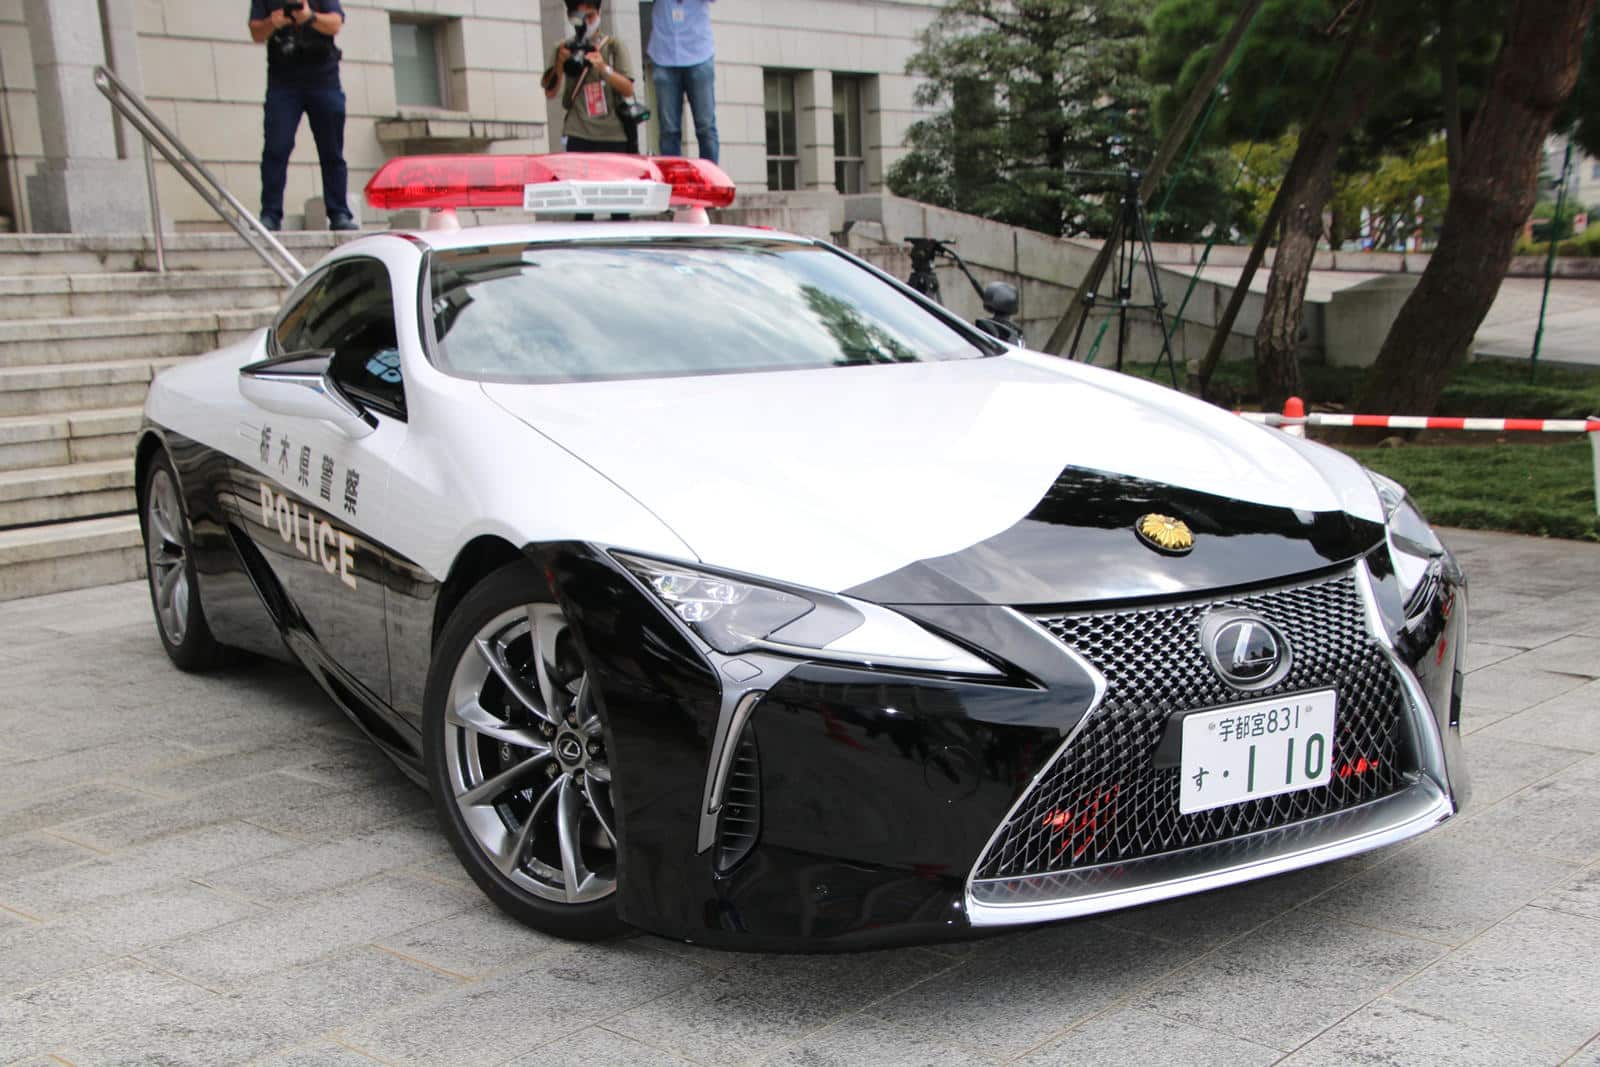 Front-angled view of a Japan Police Lexus LC500